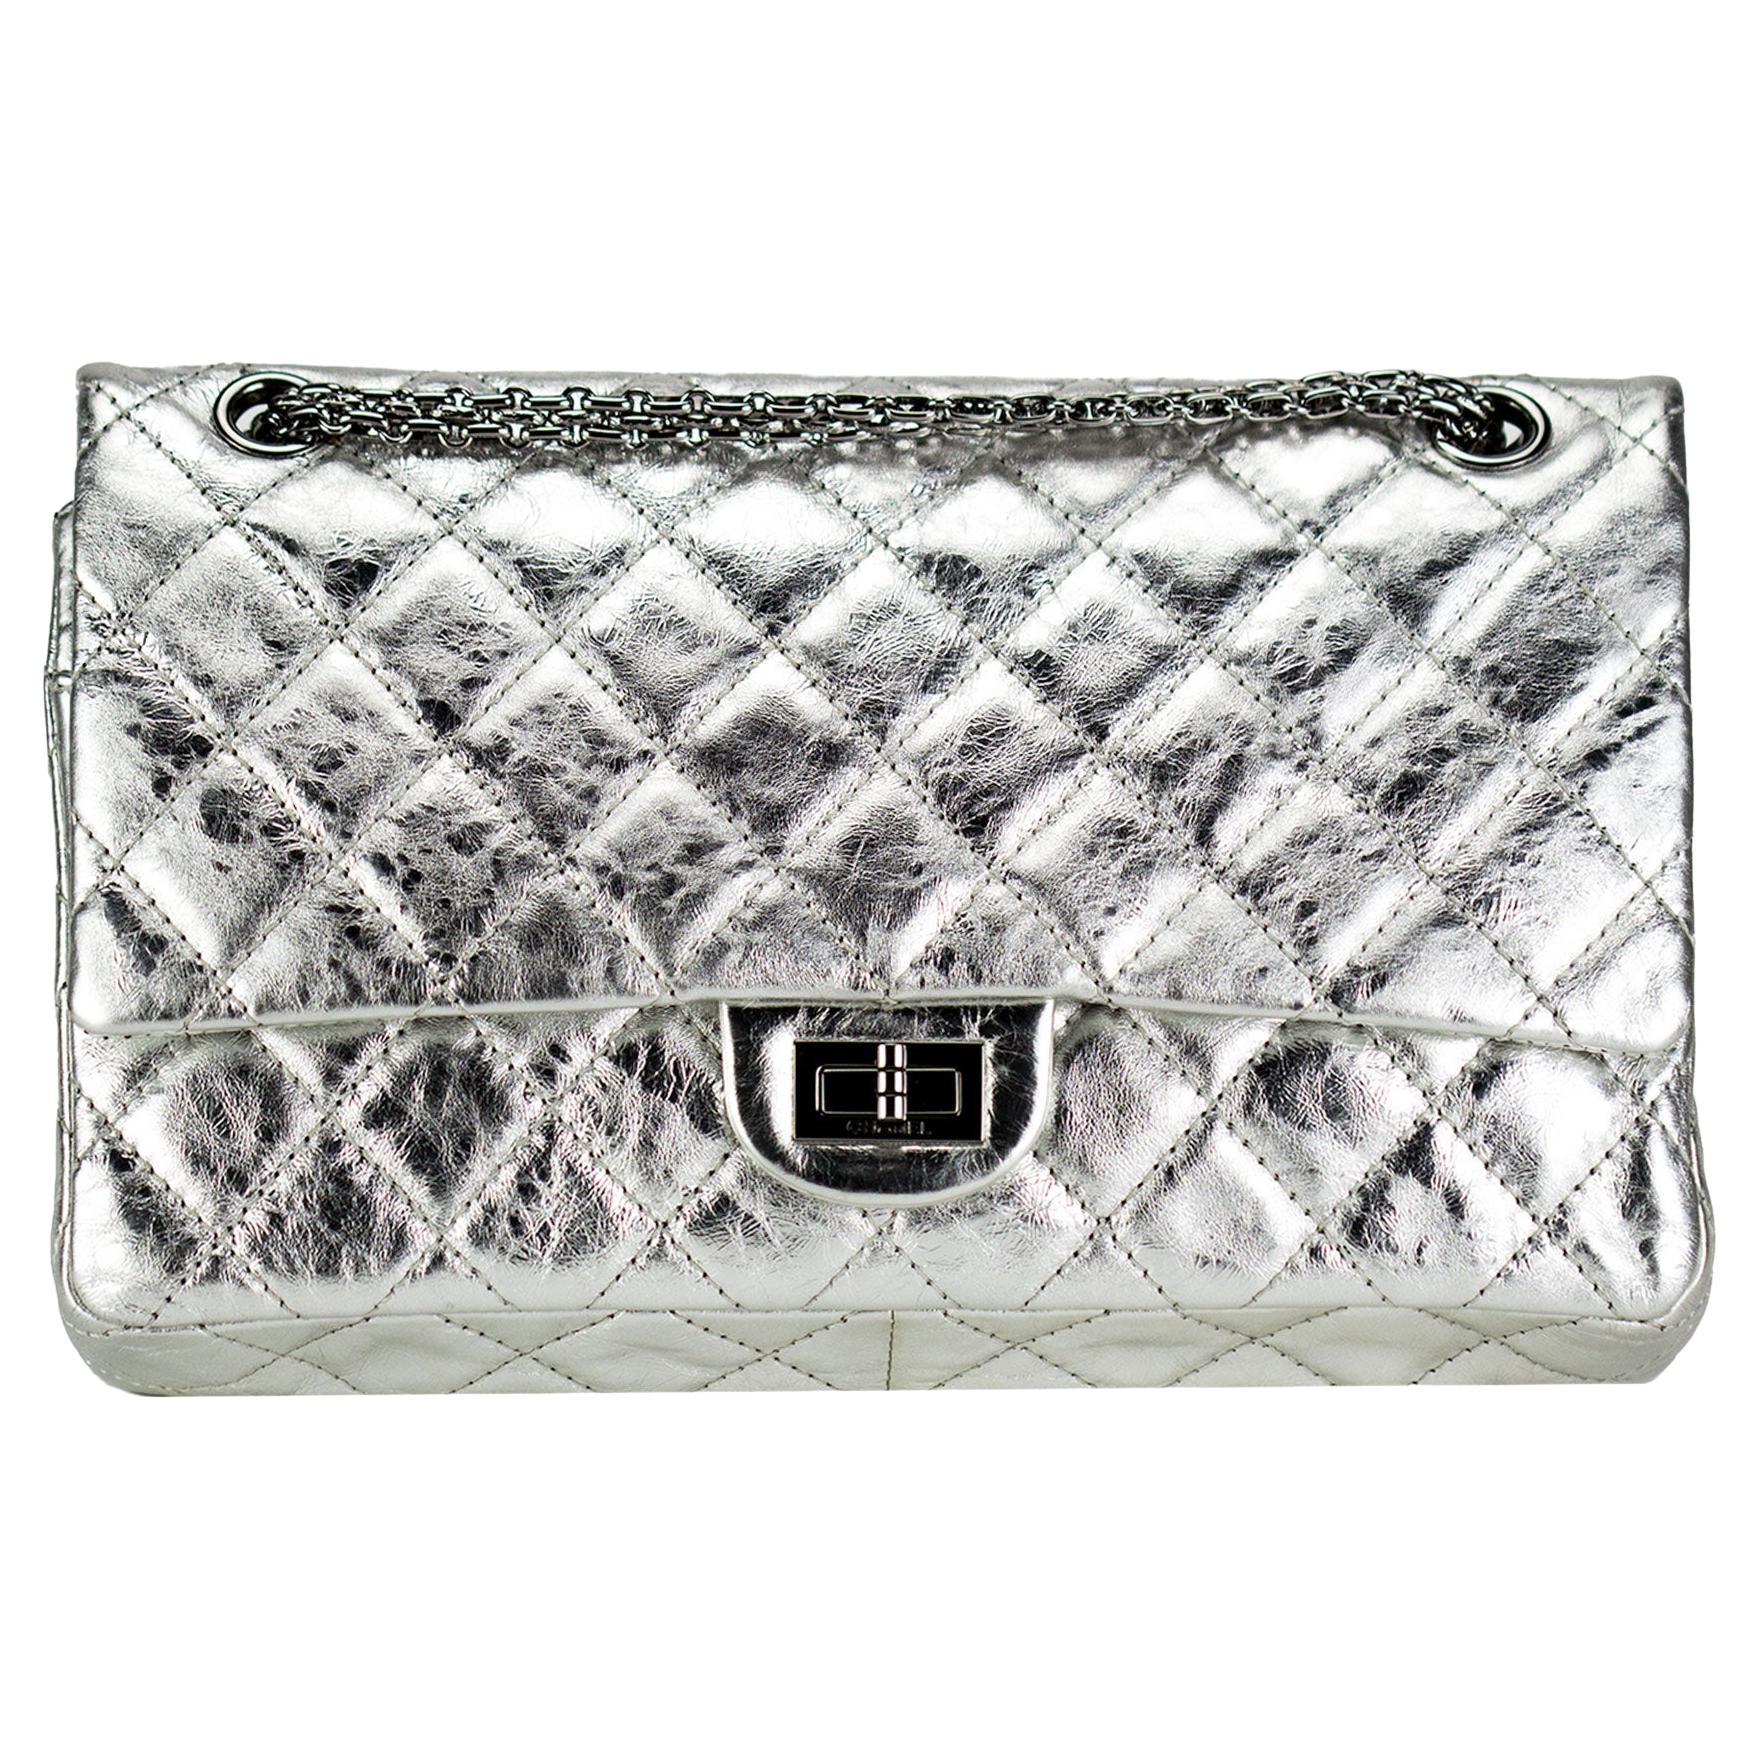 Metallic silver aged calfskin reissue flap with gunmetal hardware 

{2006 VINTAGE 16 Years}
Interior flap closure
Mademoiselle clasp closure
Interior flap zipper pocket
Five interior pockets
Interior gunmetal lining
Classic back pocket
7